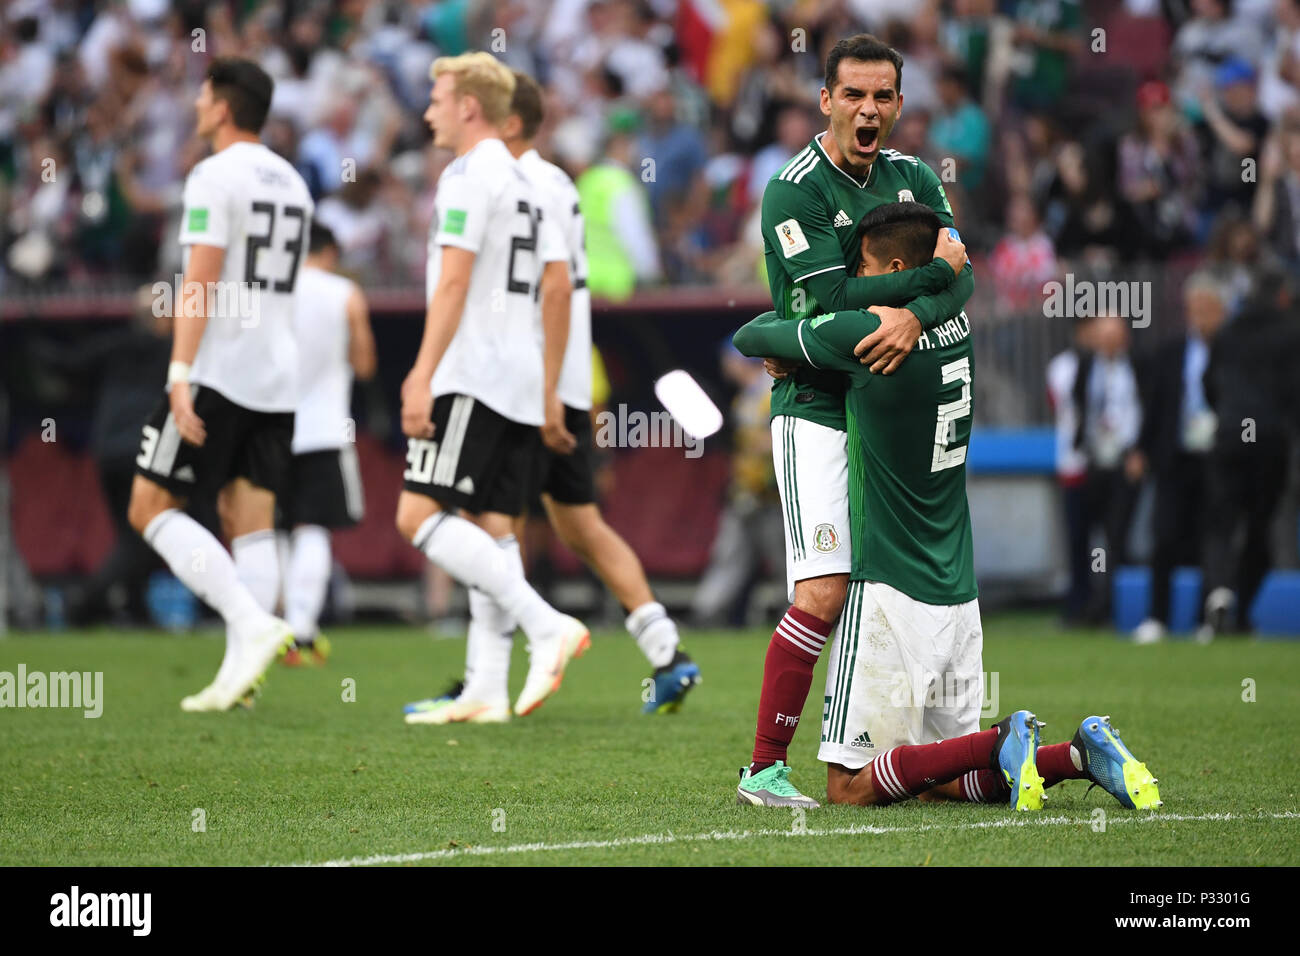 Moscow, Russia. 17th June, 2018. jubilation at the Mexicans after the game: Rafael Marquez (Mexico) with Hugo Ayala (Mexico). Behind it German player is disappointed. GES/Football/World Cup 2018 Russia: Germany - Mexico, 17.06.2018 GES/Soccer/Football/Worldcup 2018 Russia: Germany vs Mexico, Moscow, June 17, 2018 | usage worldwide Credit: dpa/Alamy Live News Stock Photo